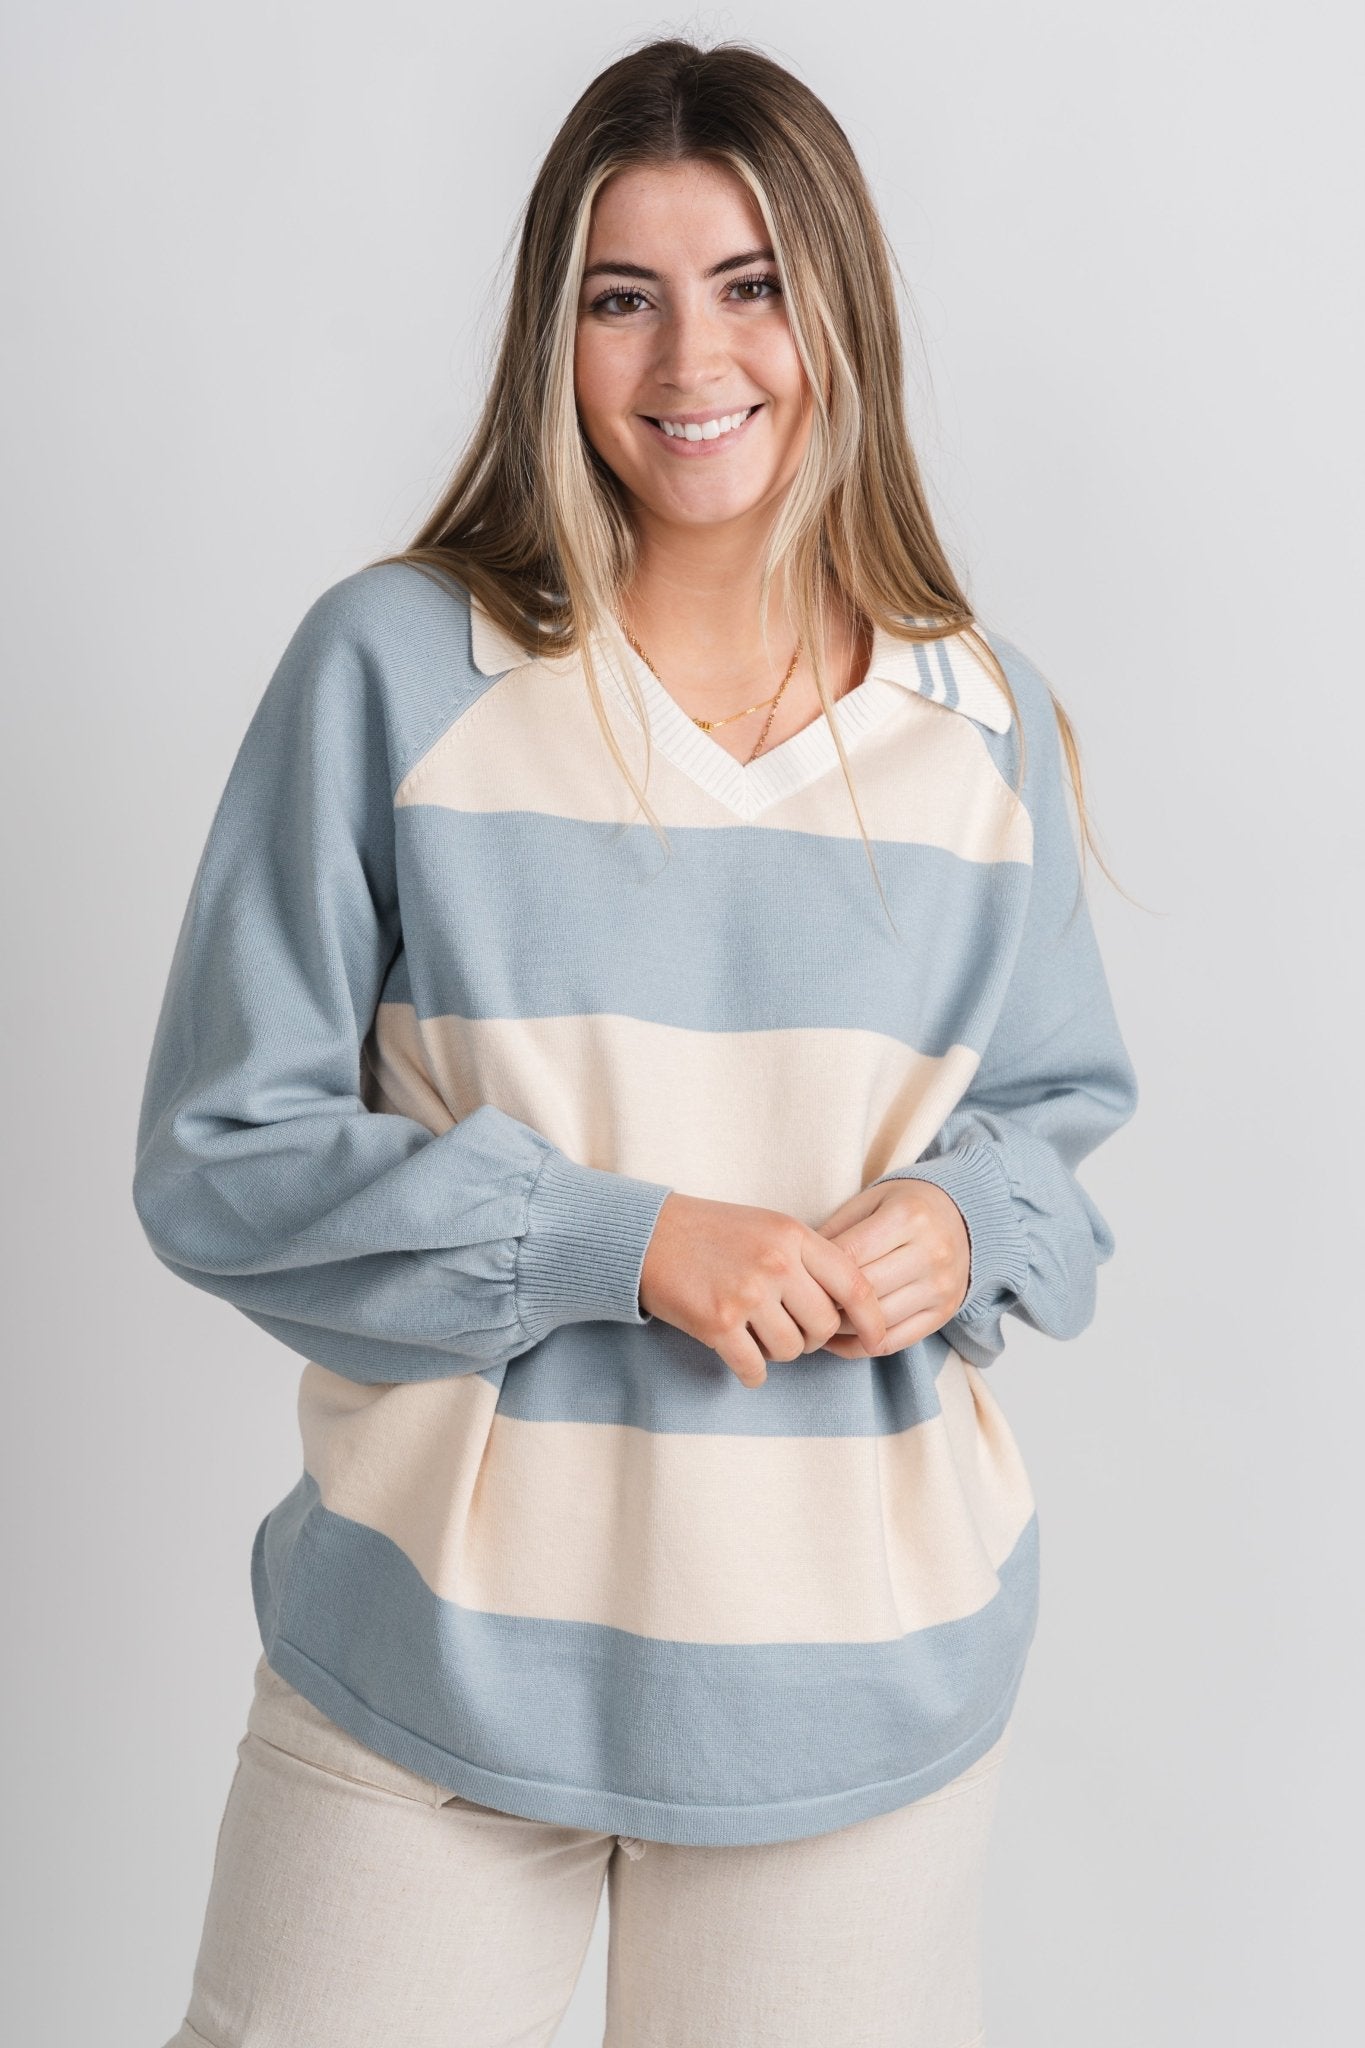 Striped varsity sweater cream/light blue – Stylish Sweaters | Boutique Sweaters at Lush Fashion Lounge Boutique in Oklahoma City